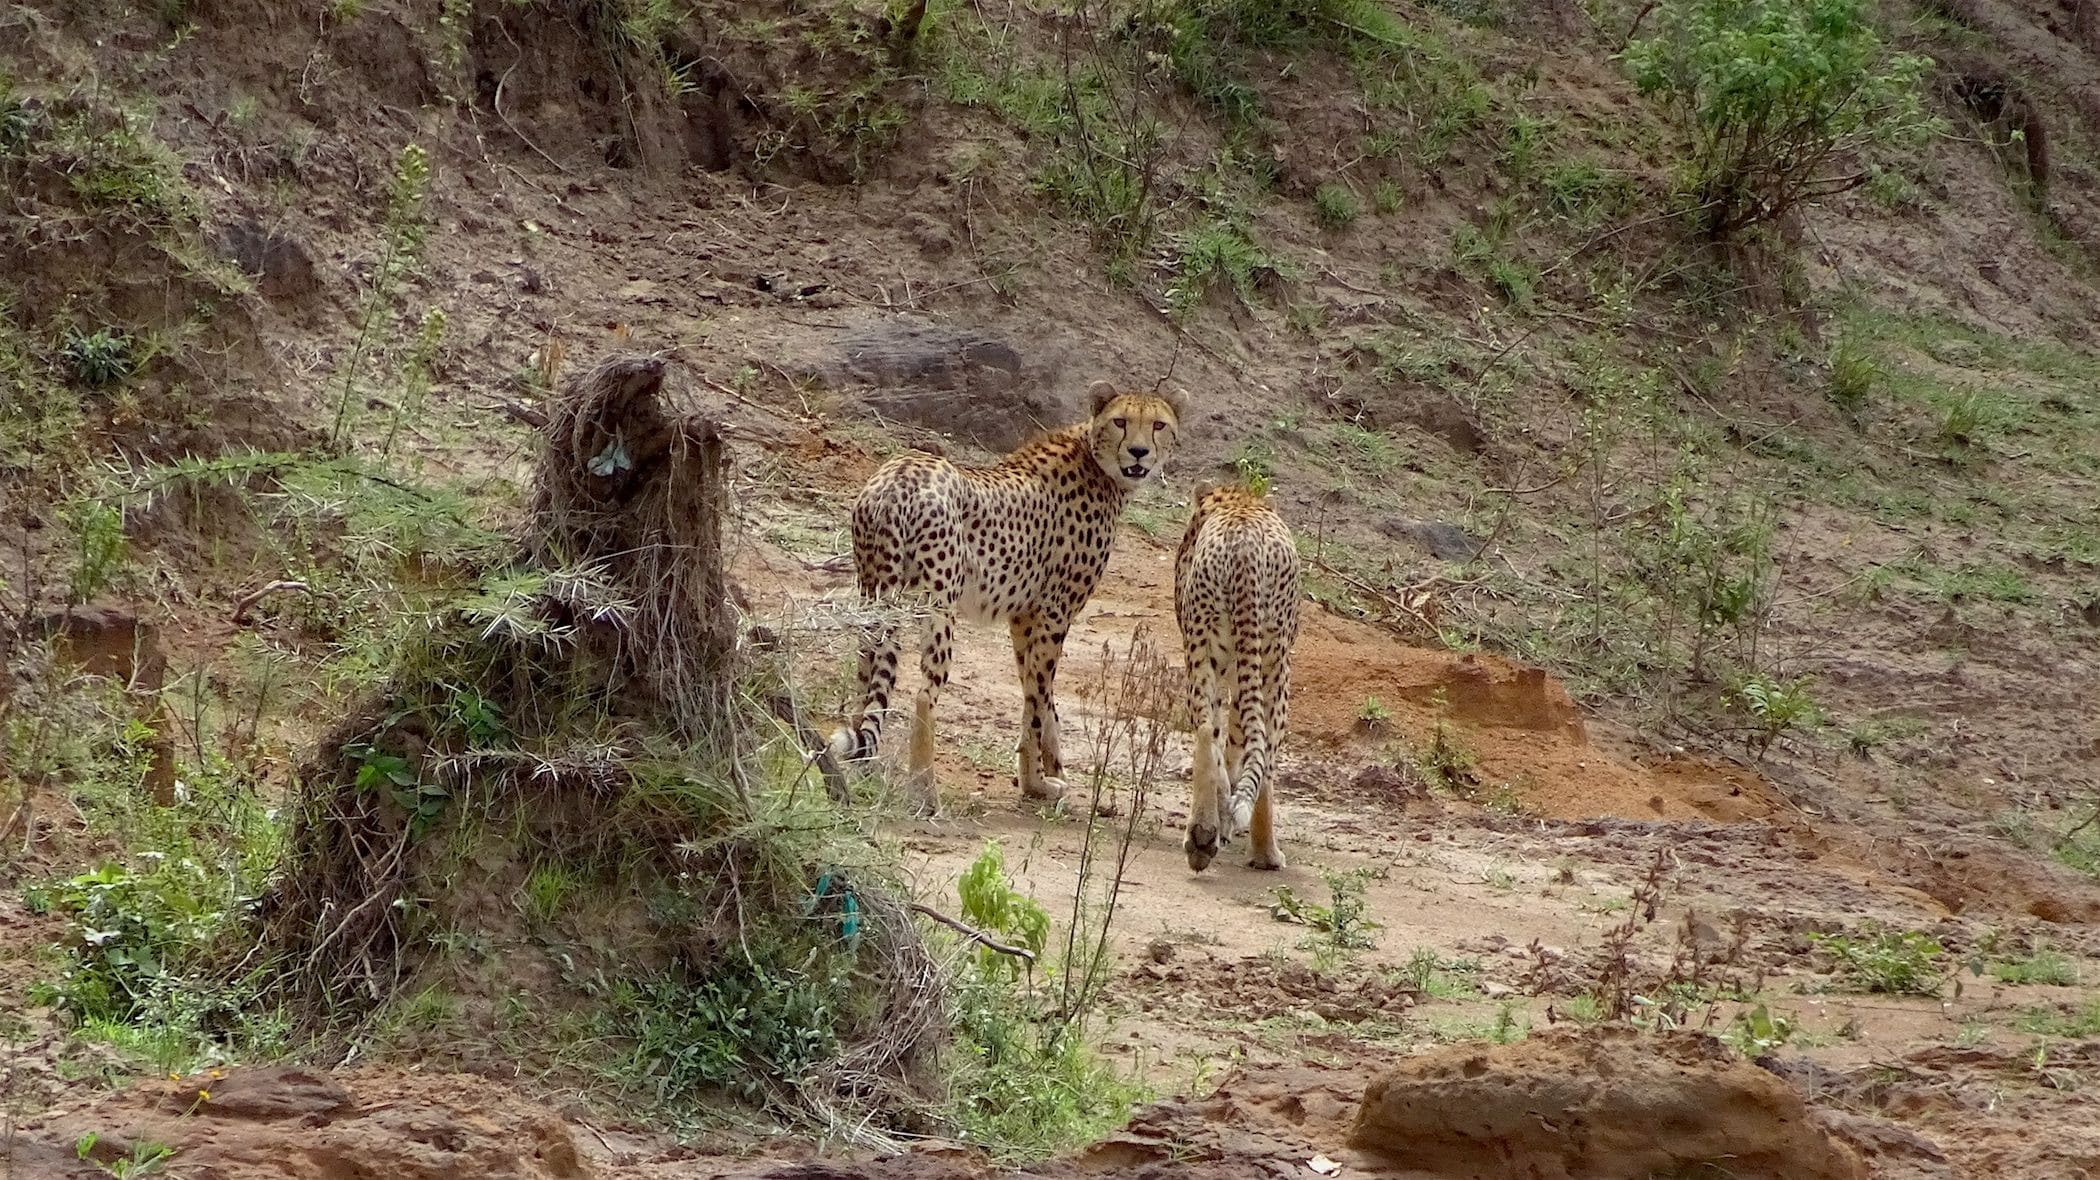 A picture is worth a 1000 words. Write a story about the cheetahs in the photos. Create your own tale of tails!